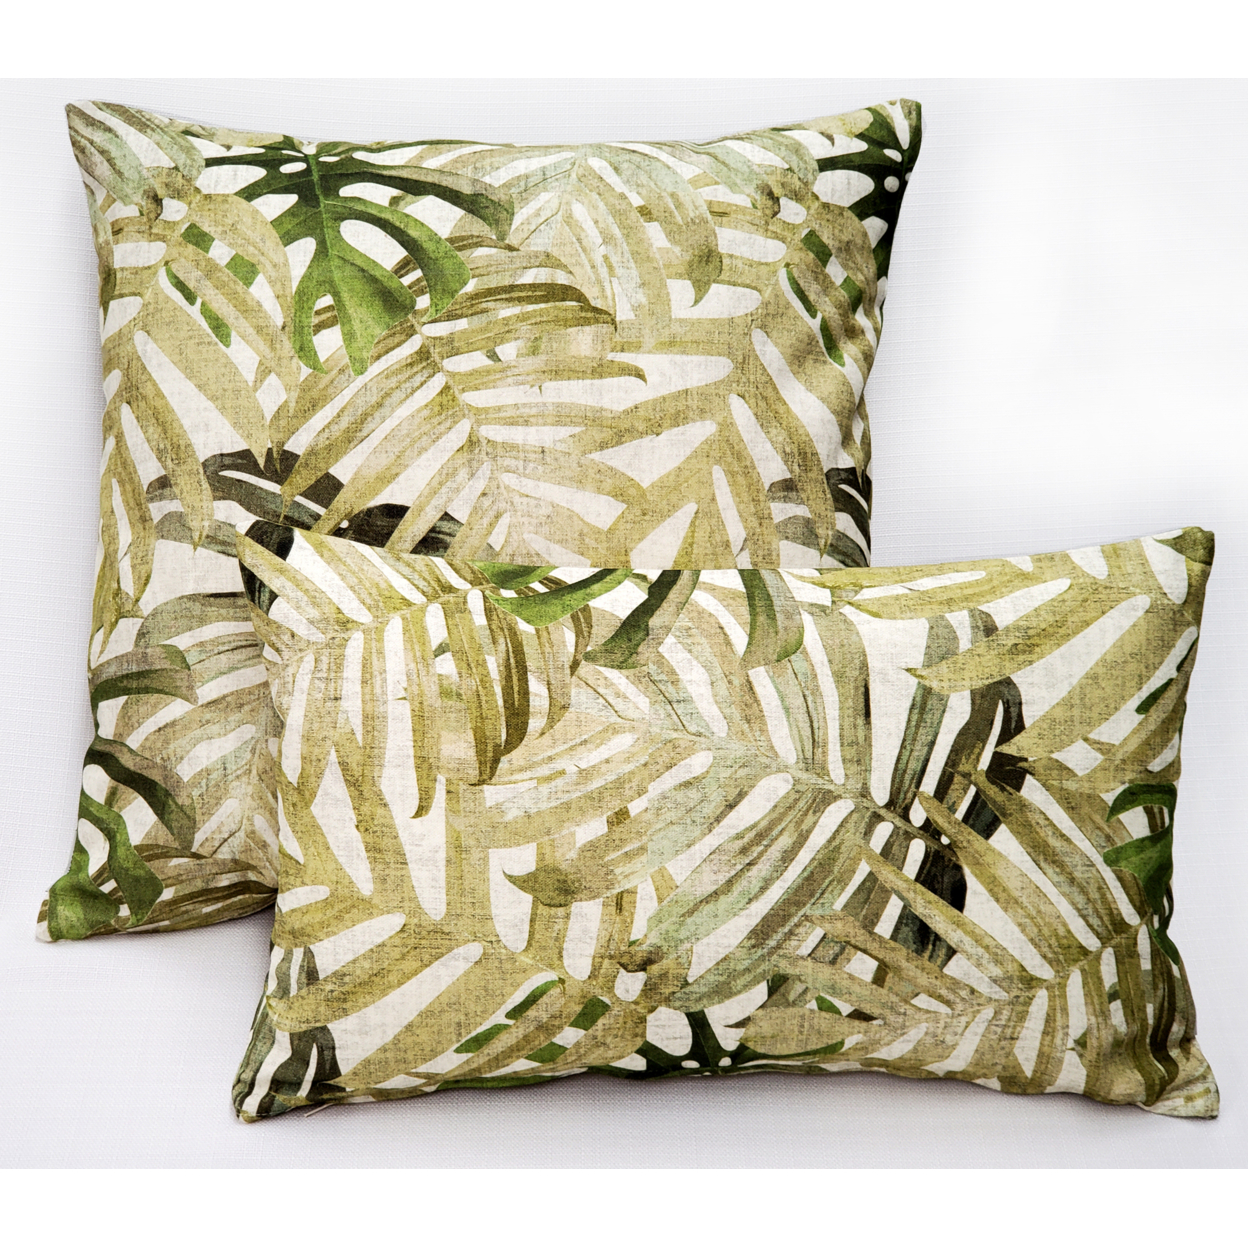 Pattaya Green Palm Throw Pillow 12x20 Inches Square, Complete Pillow With Polyfill Pillow Insert